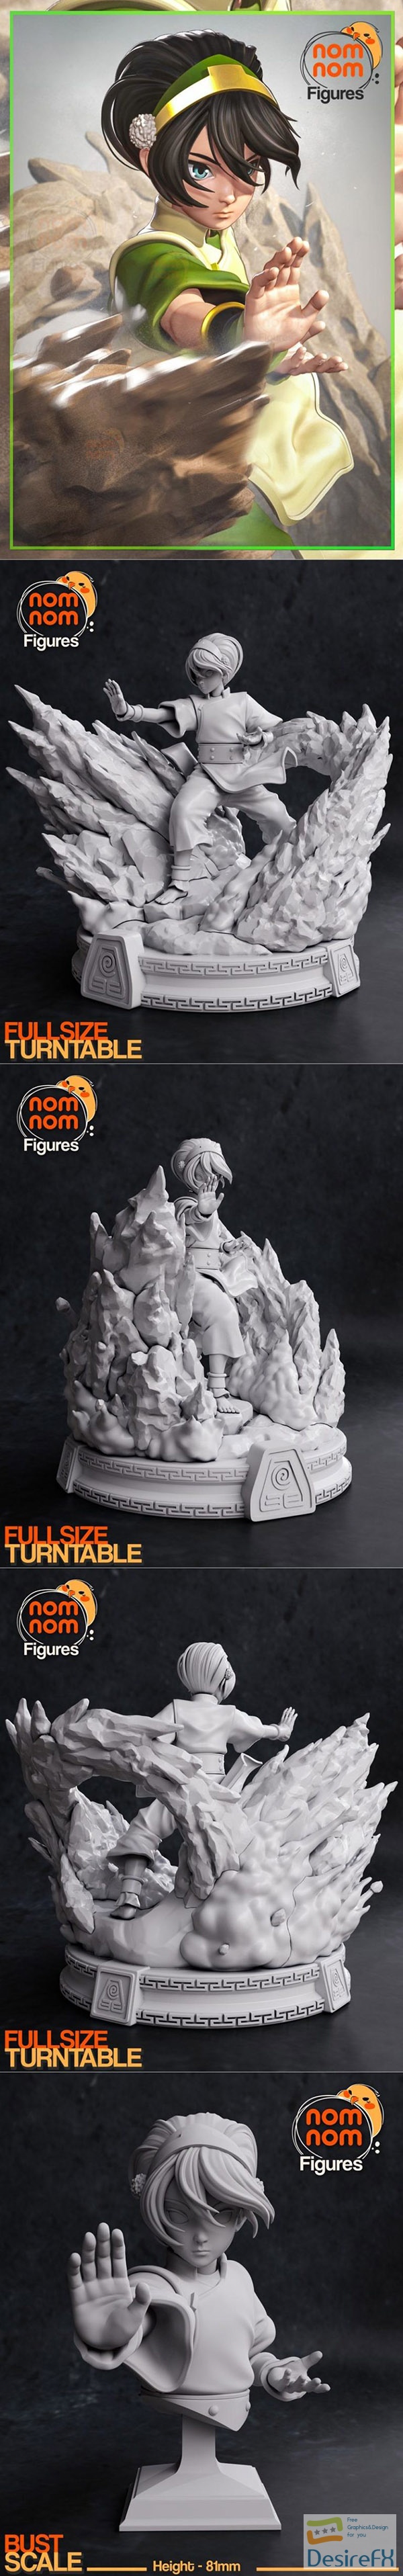 Nomnom Figures – Toph from Avatar the Last Airbender – 3D Print